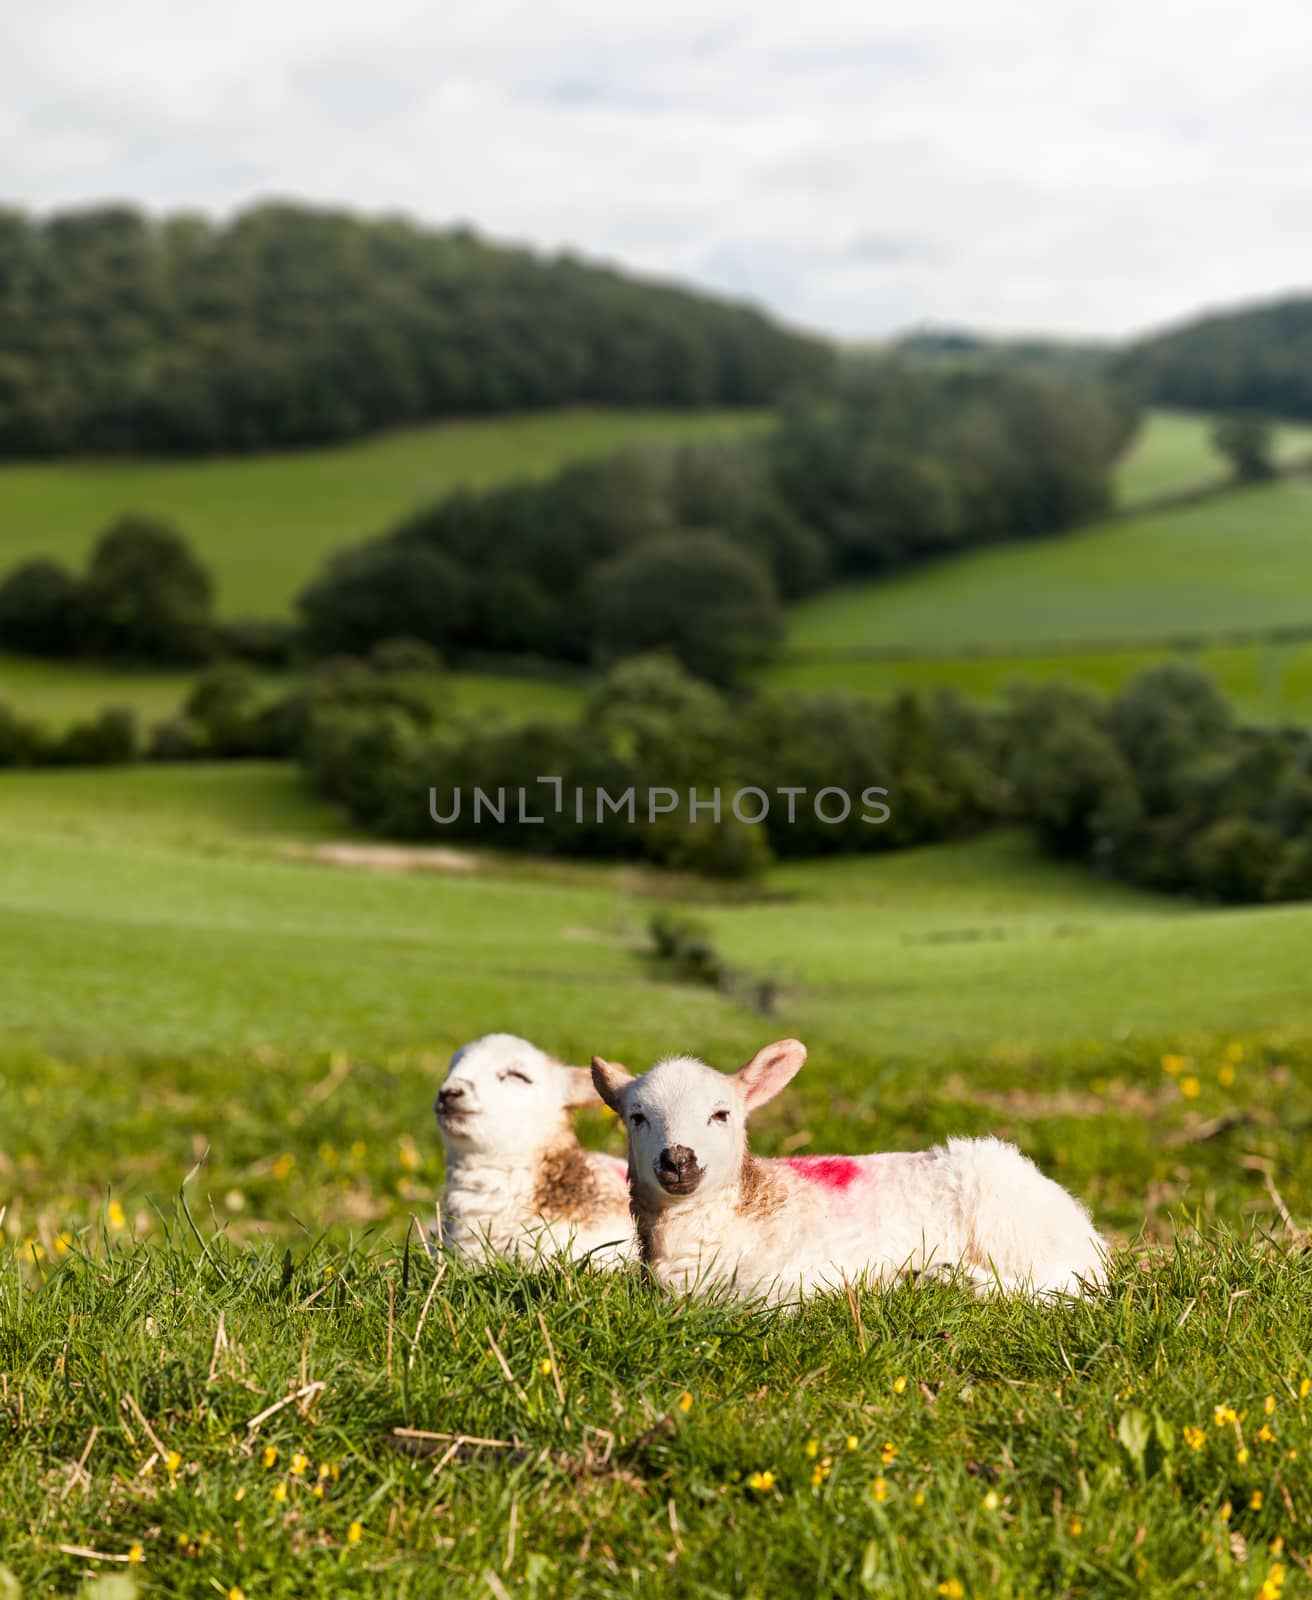 Welsh lamb with black and white wool in meadow with welsh or yorkshire hills in background